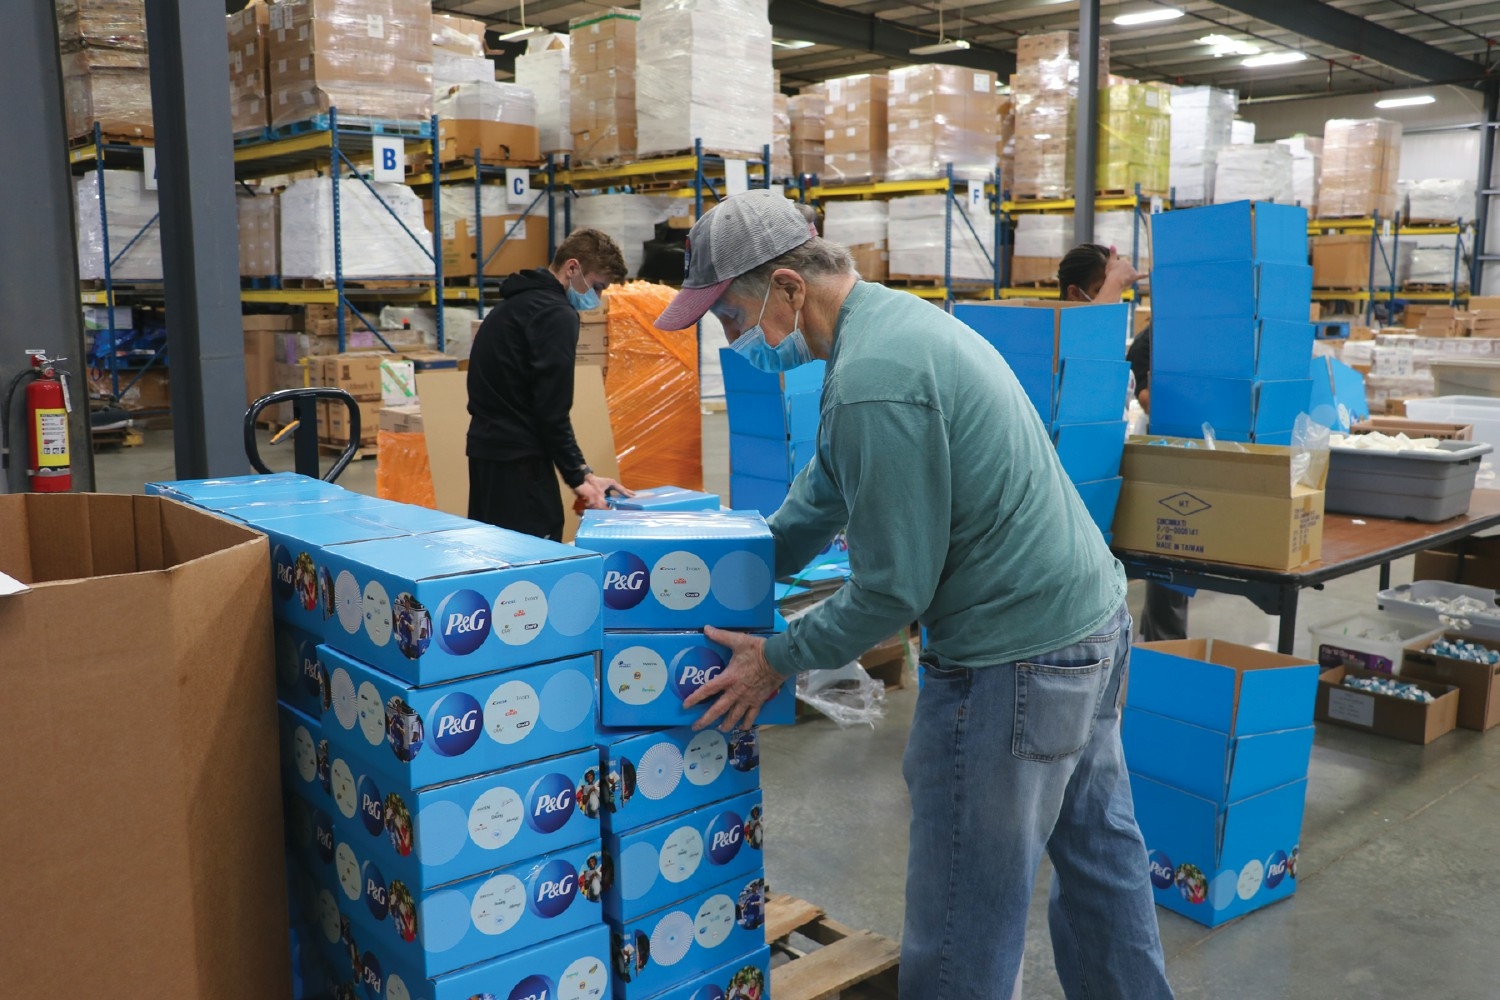 P&G employee packs donation boxes to support communities in need